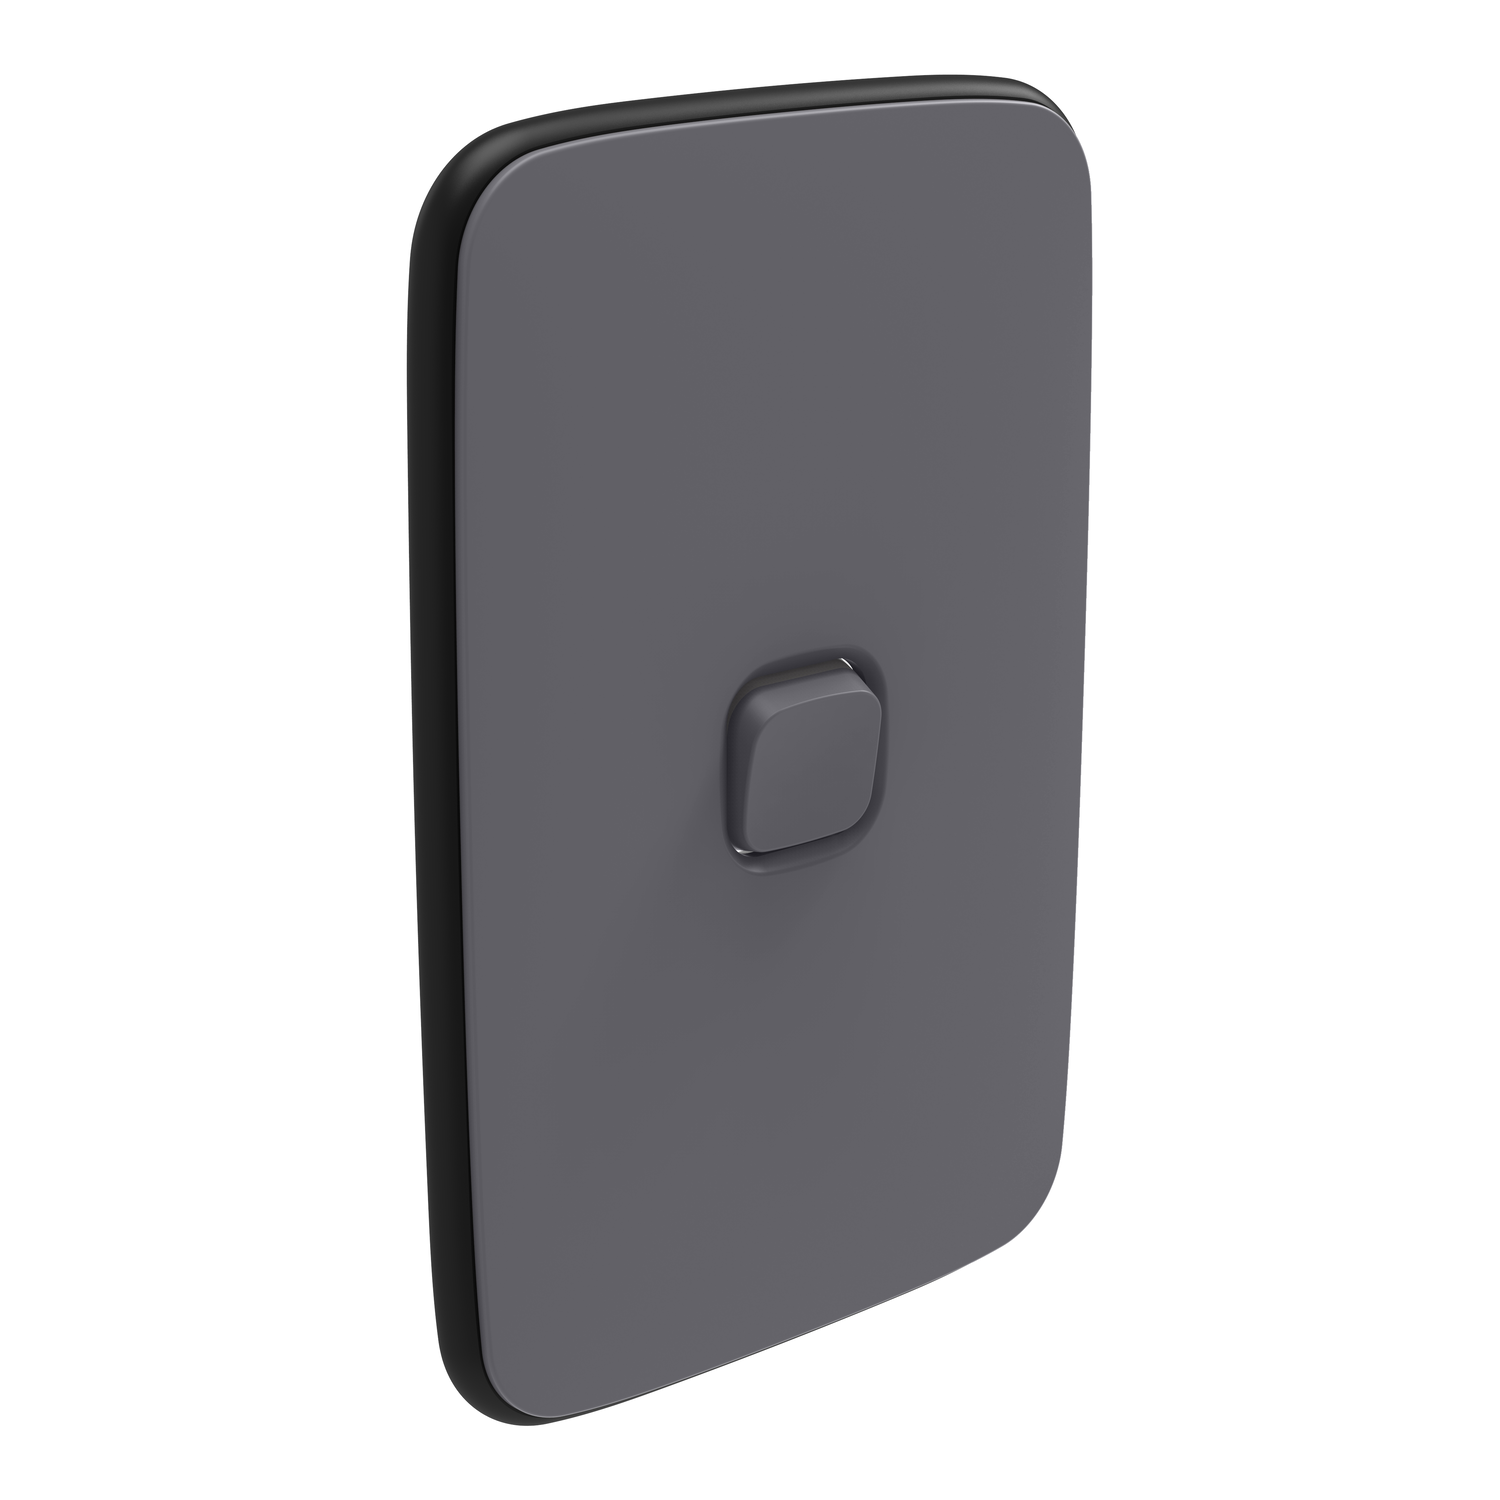 PDL Iconic Essence - Cover Plate Switch 1-Gang - Ash Grey